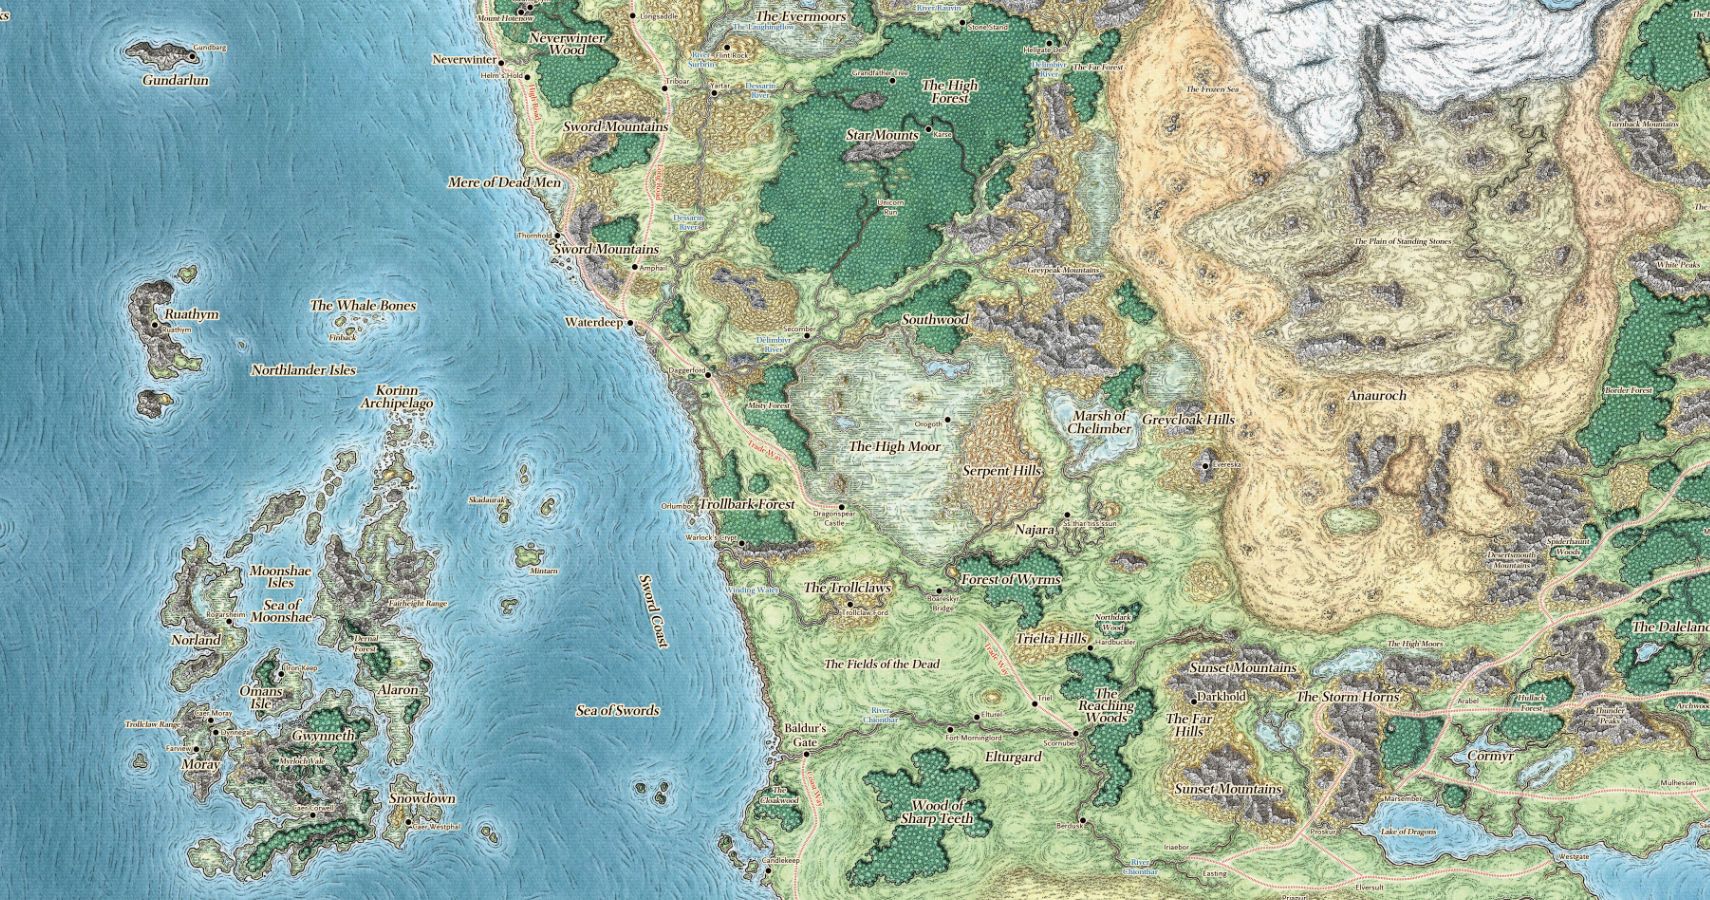 D&D Homebrew Tips: Creating Maps For Your World Part 1